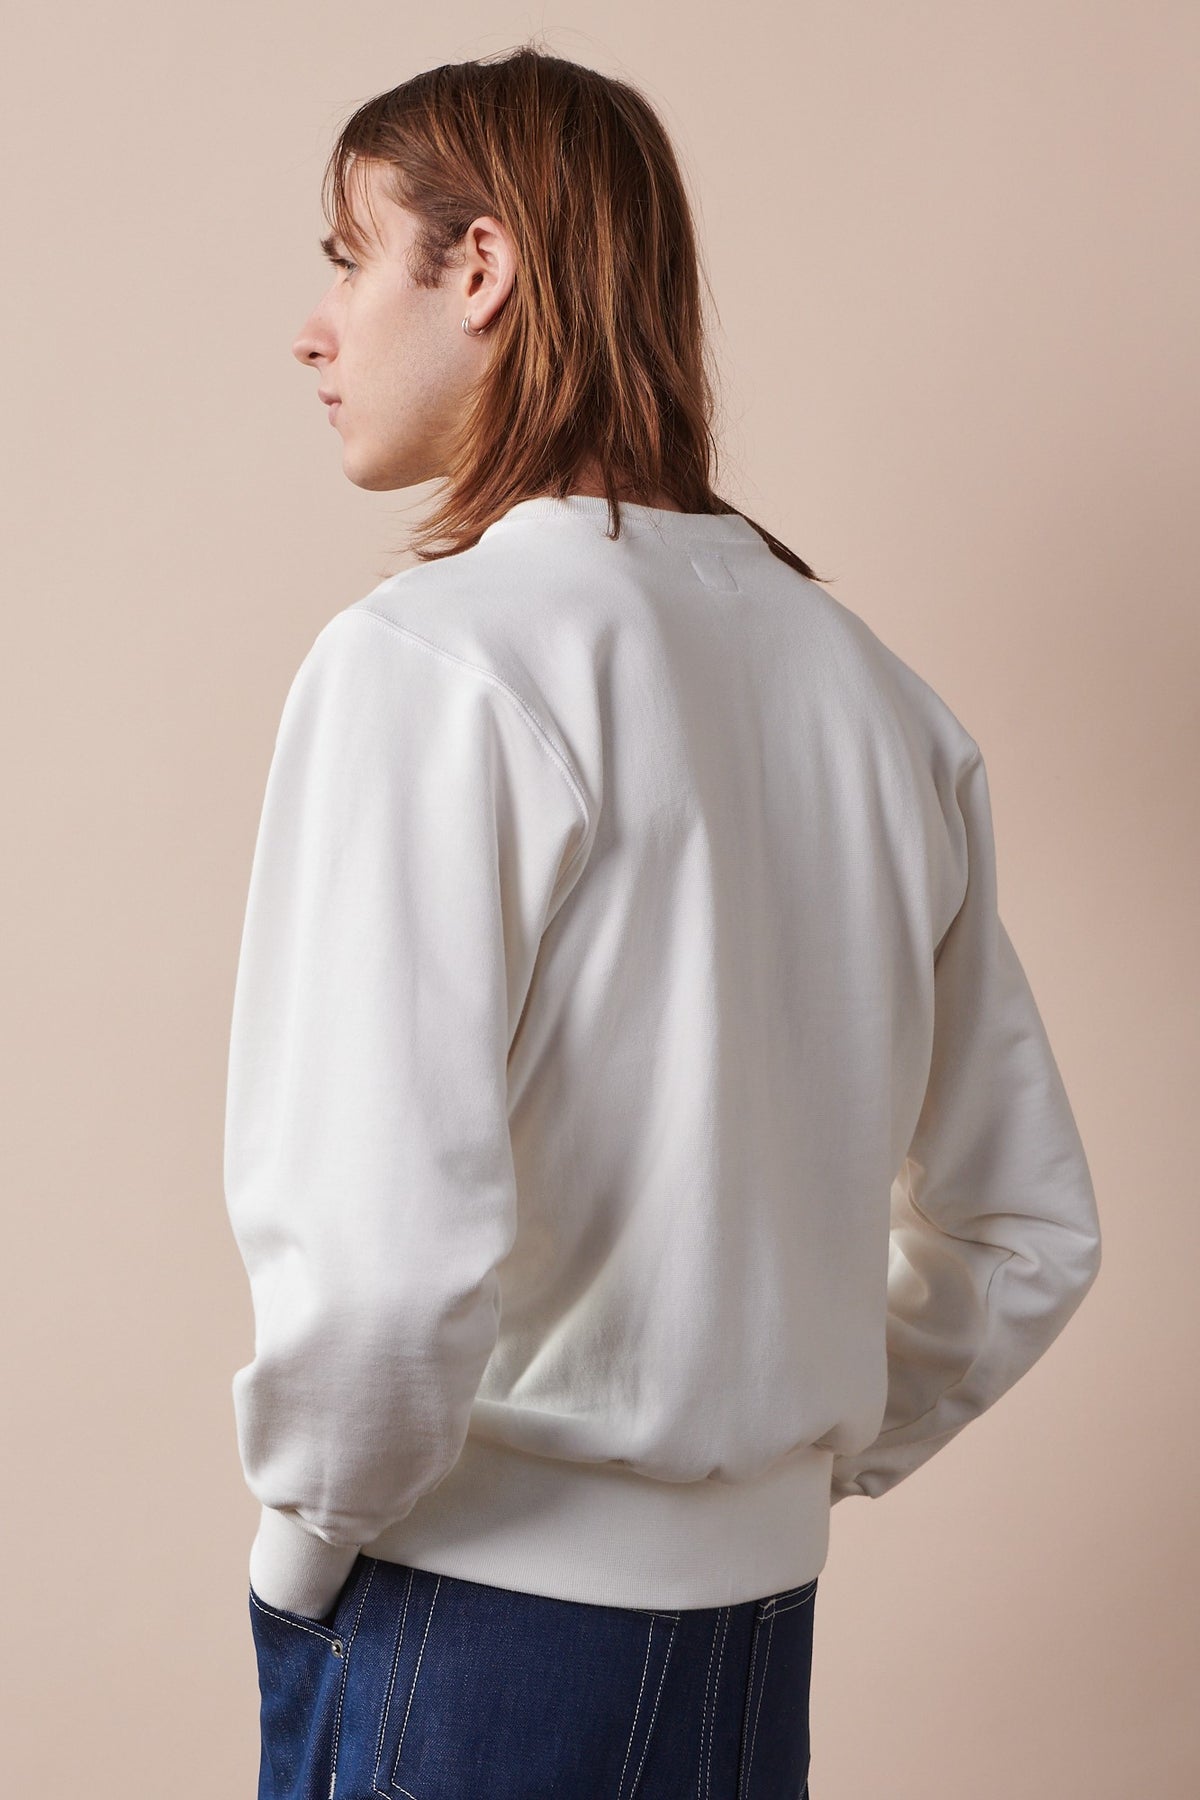 
            Thigh up  image of the back of male with shoulder length hair wearing Oversized 80s Style Sweatshirt in bone 